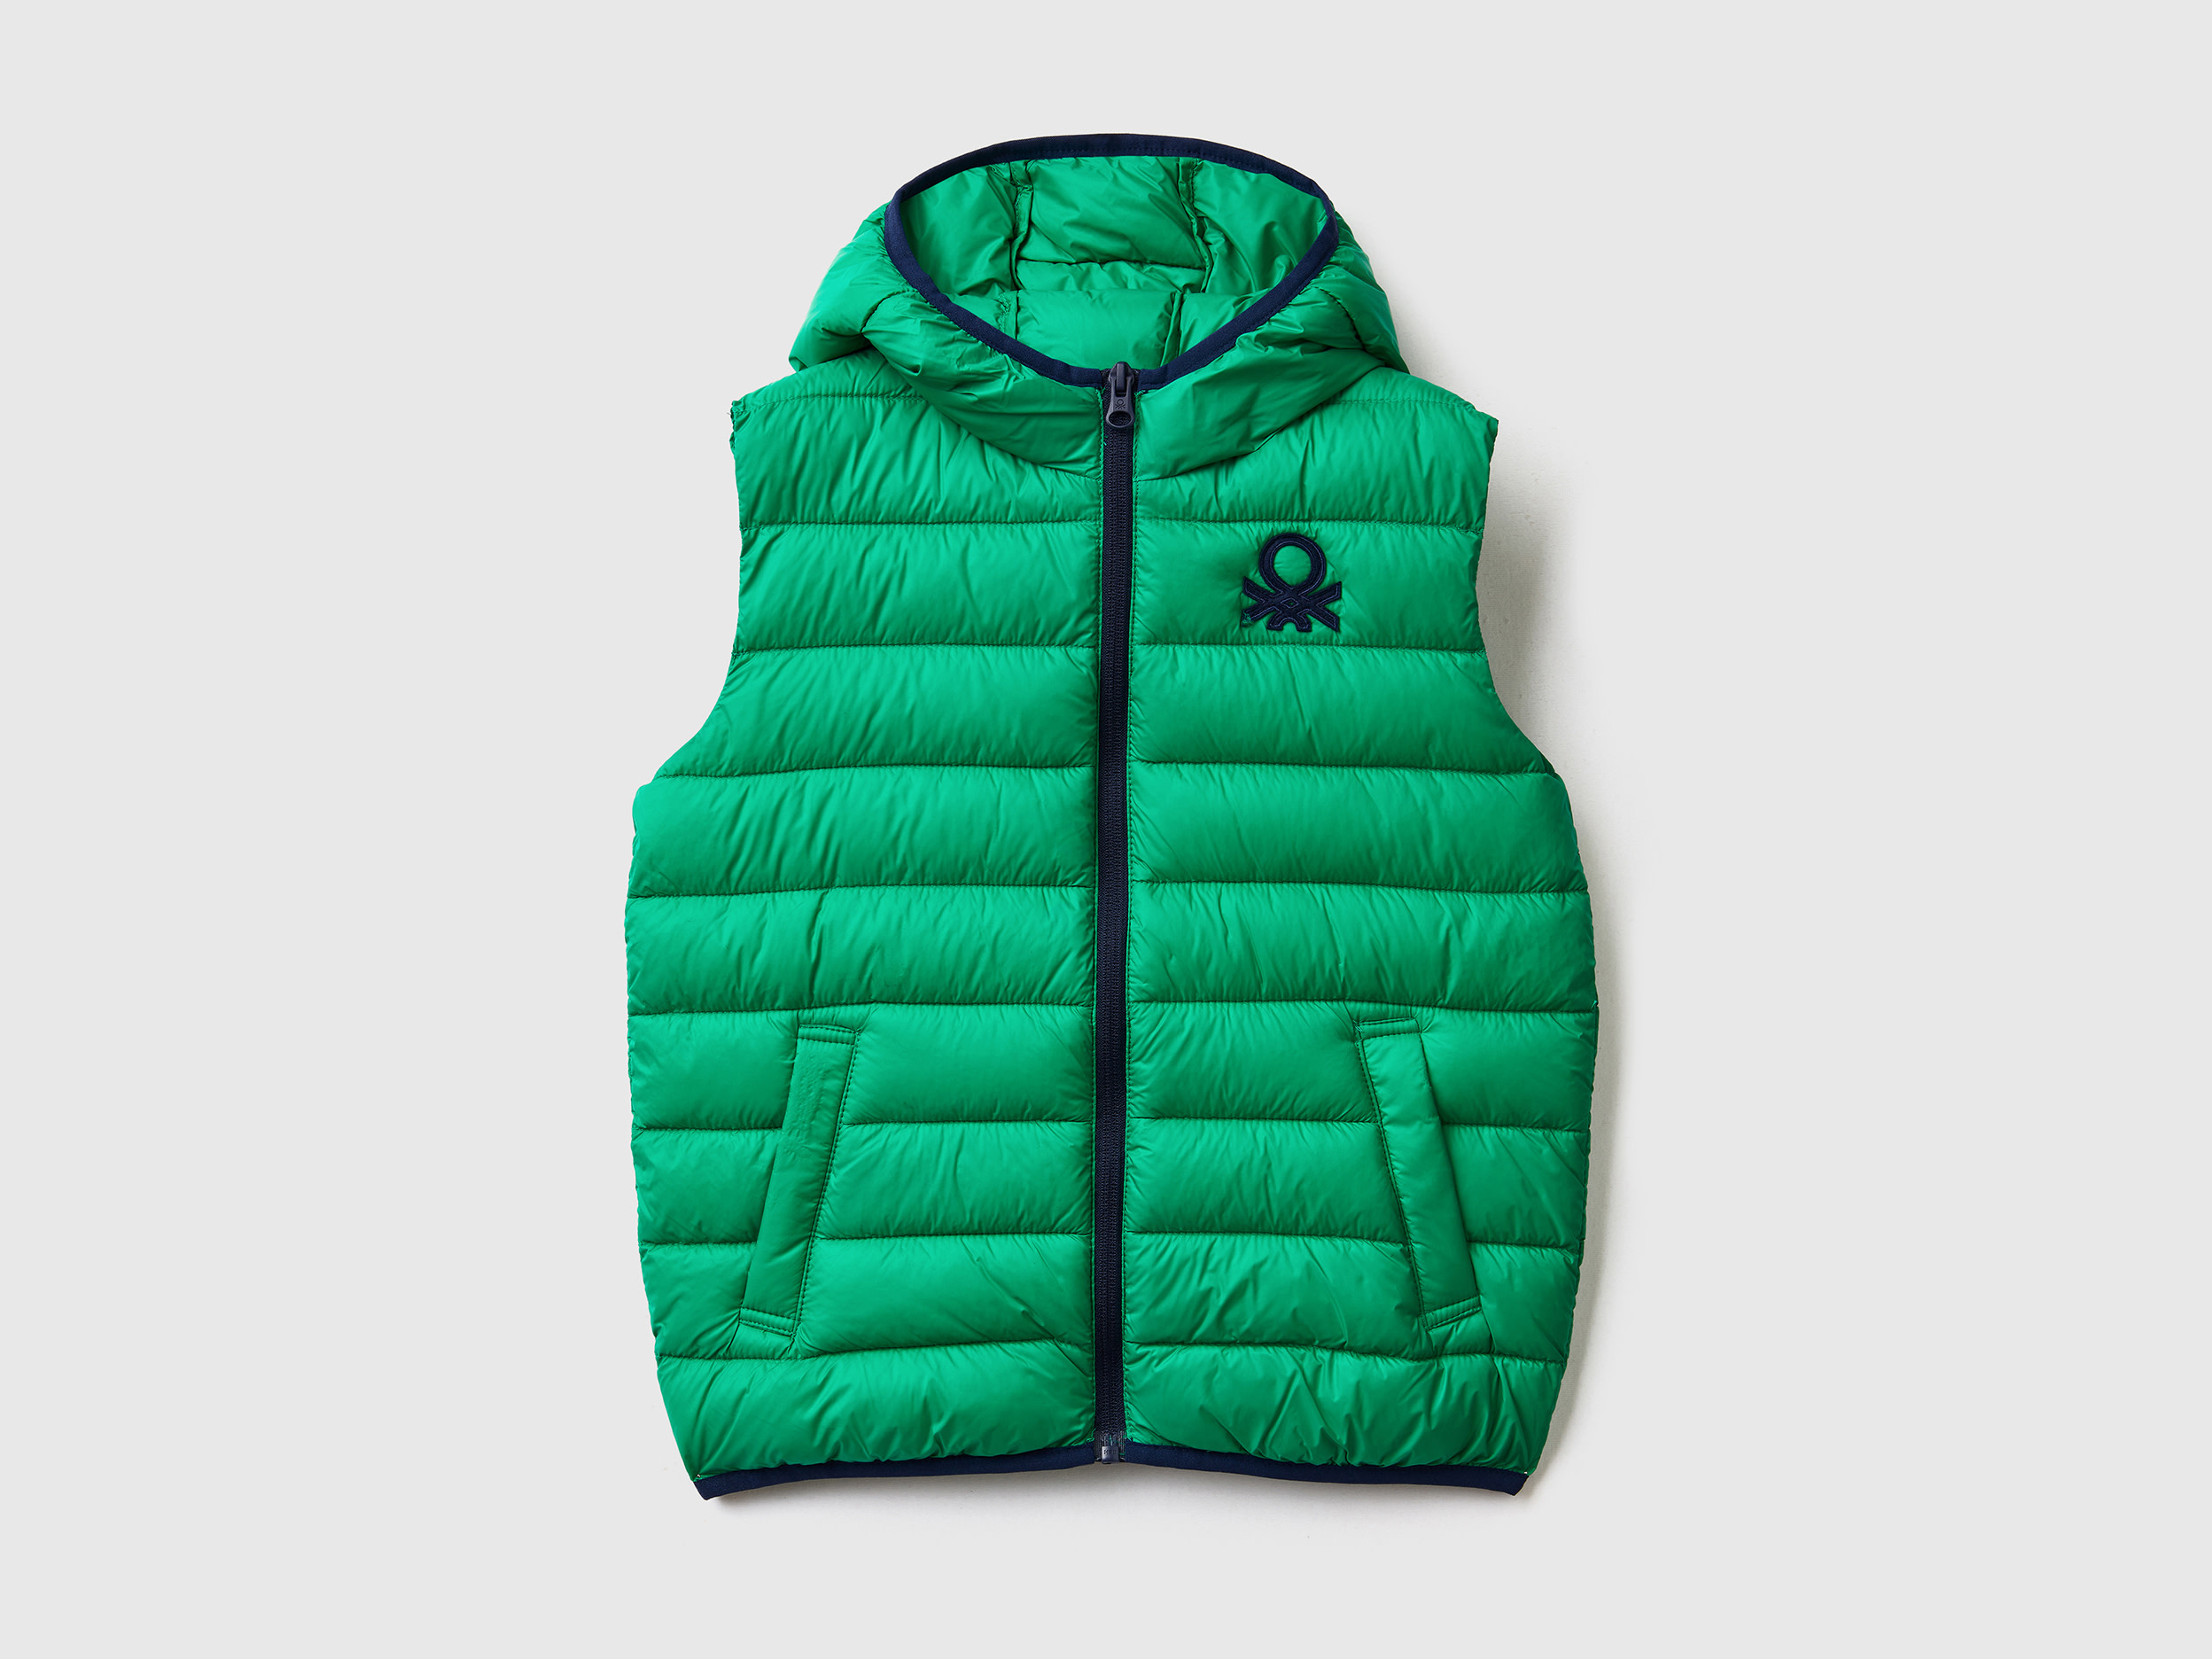 Benetton, Padded Jacket With Hood, size 3XL, Green, Kids